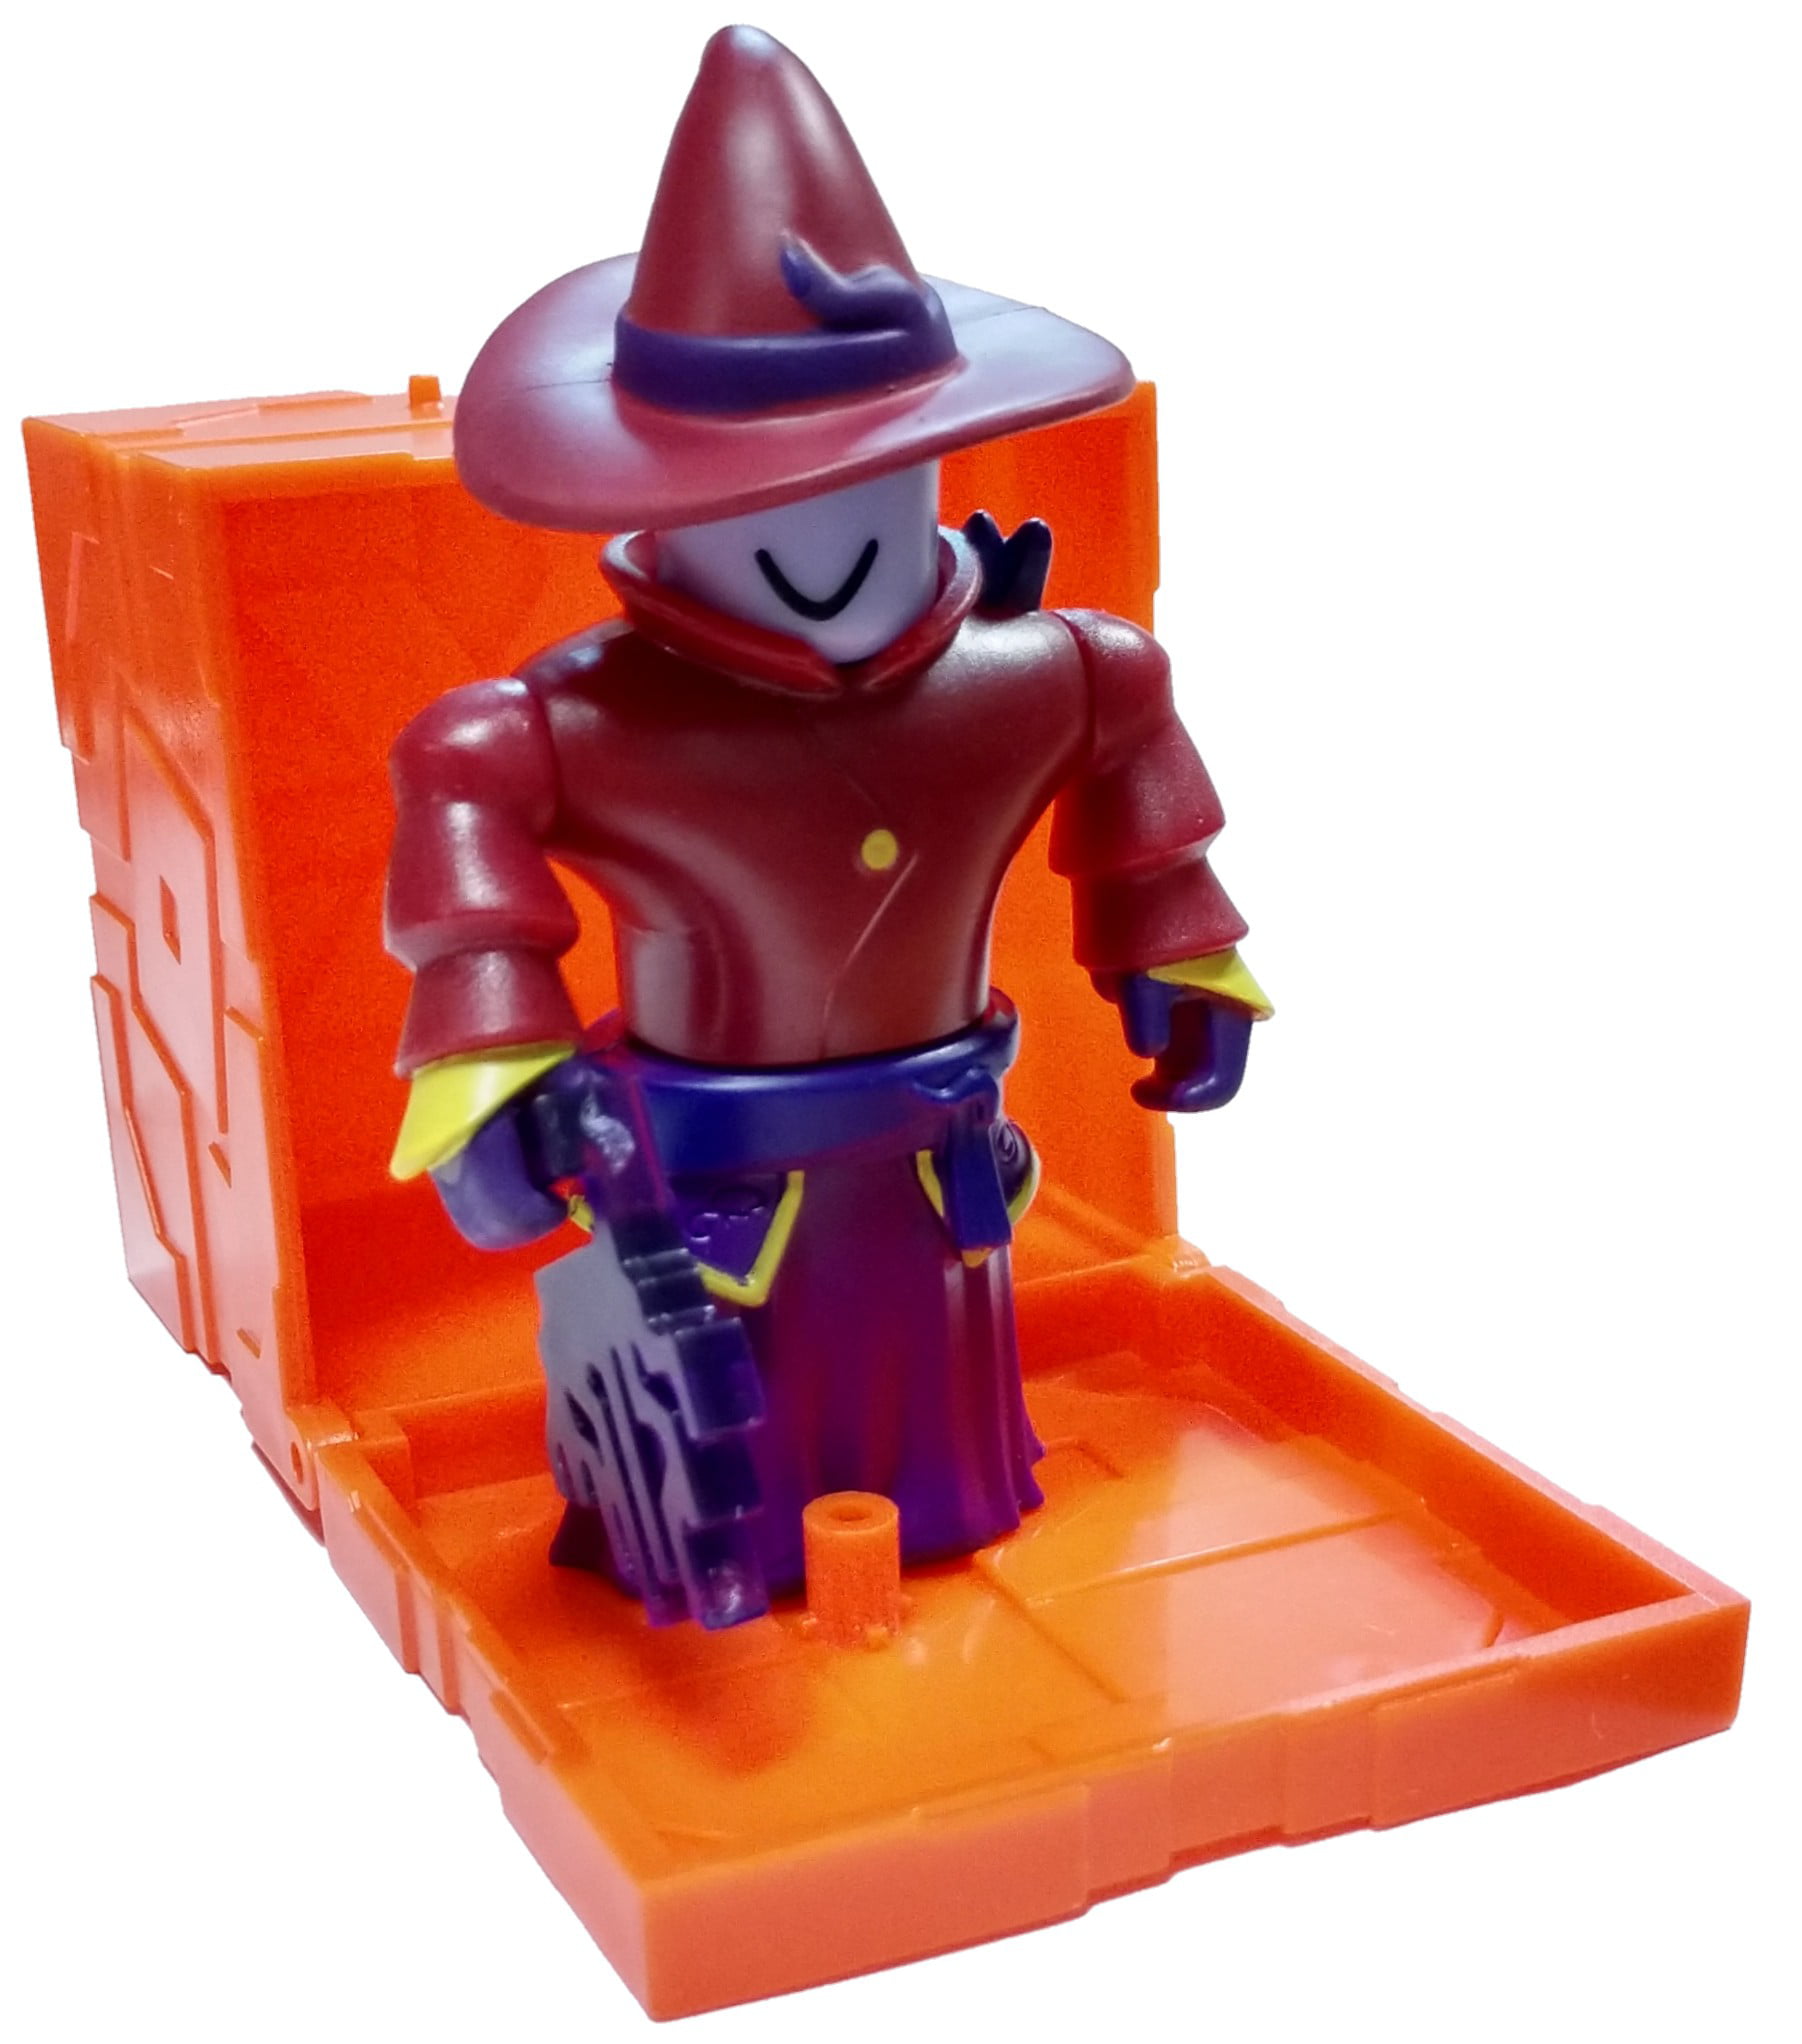 Roblox Series 6 Dread Dark Wizard Mini Figure With Orange Cube And Online Code No Packaging Walmart Com Walmart Com - codes for ninja wizard roblox 2021